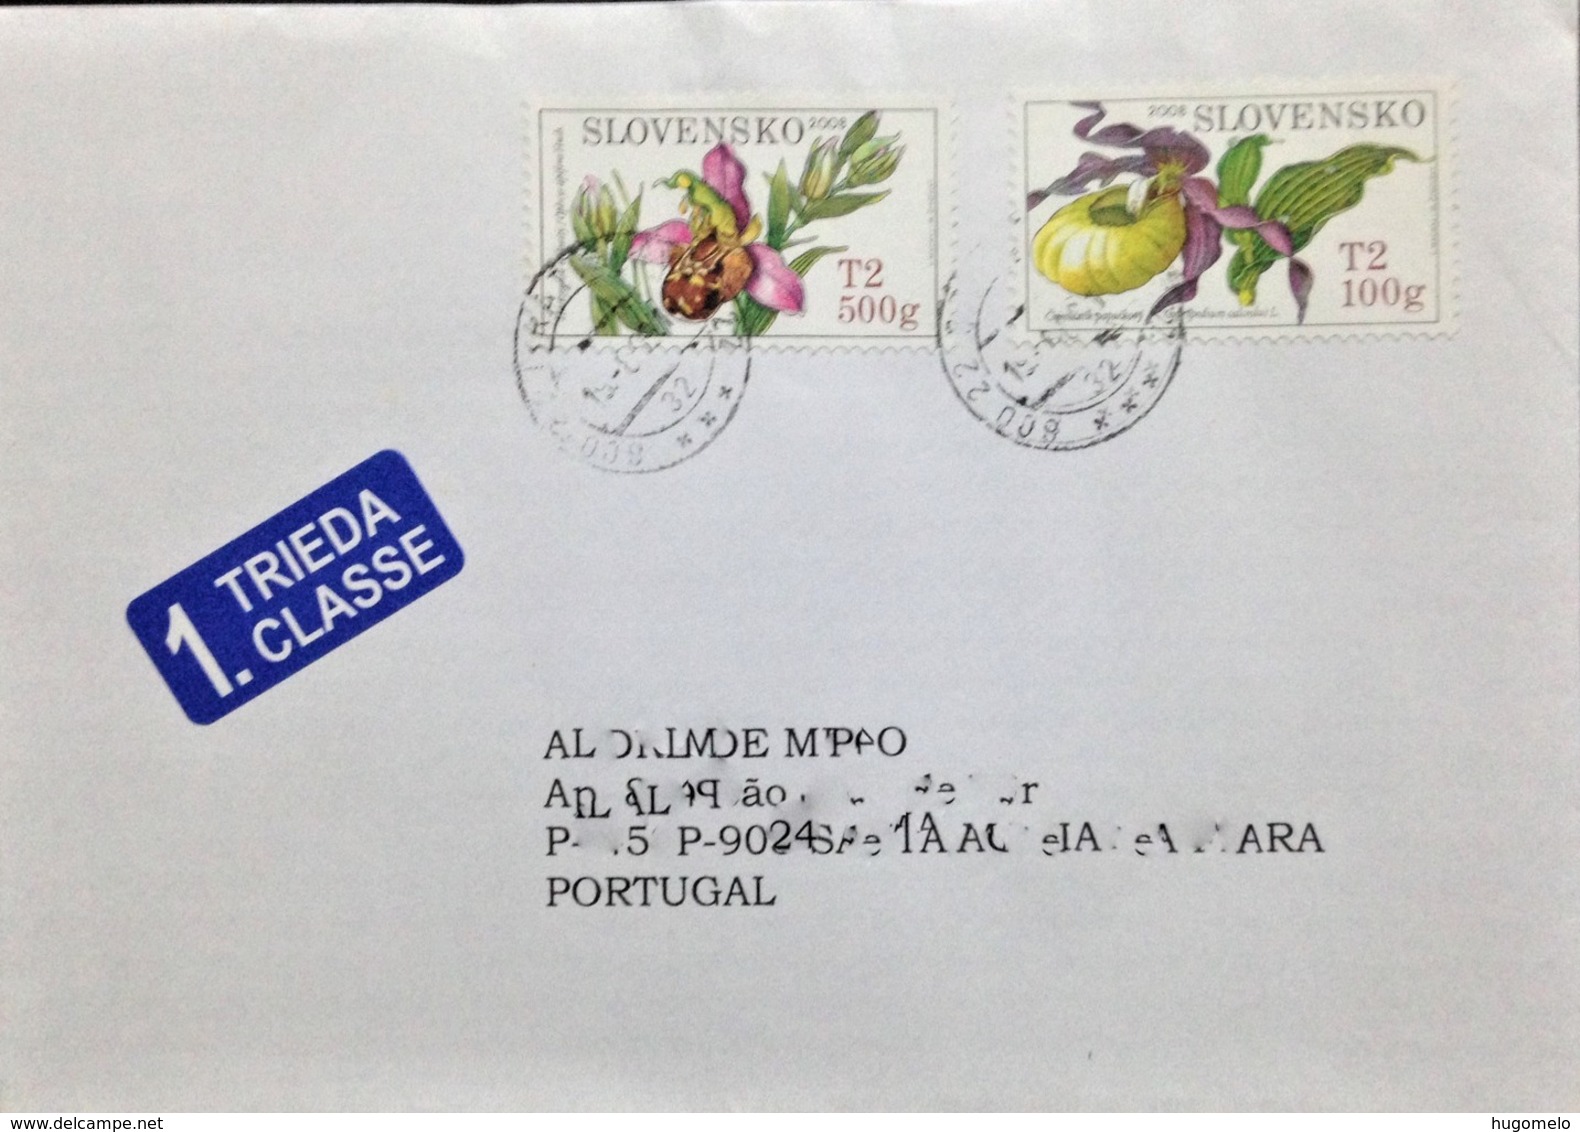 Slovakia, Circulated Cover To Portugal, "Nature", "Flora", Flowers", "Orchids", 2009 - Lettres & Documents